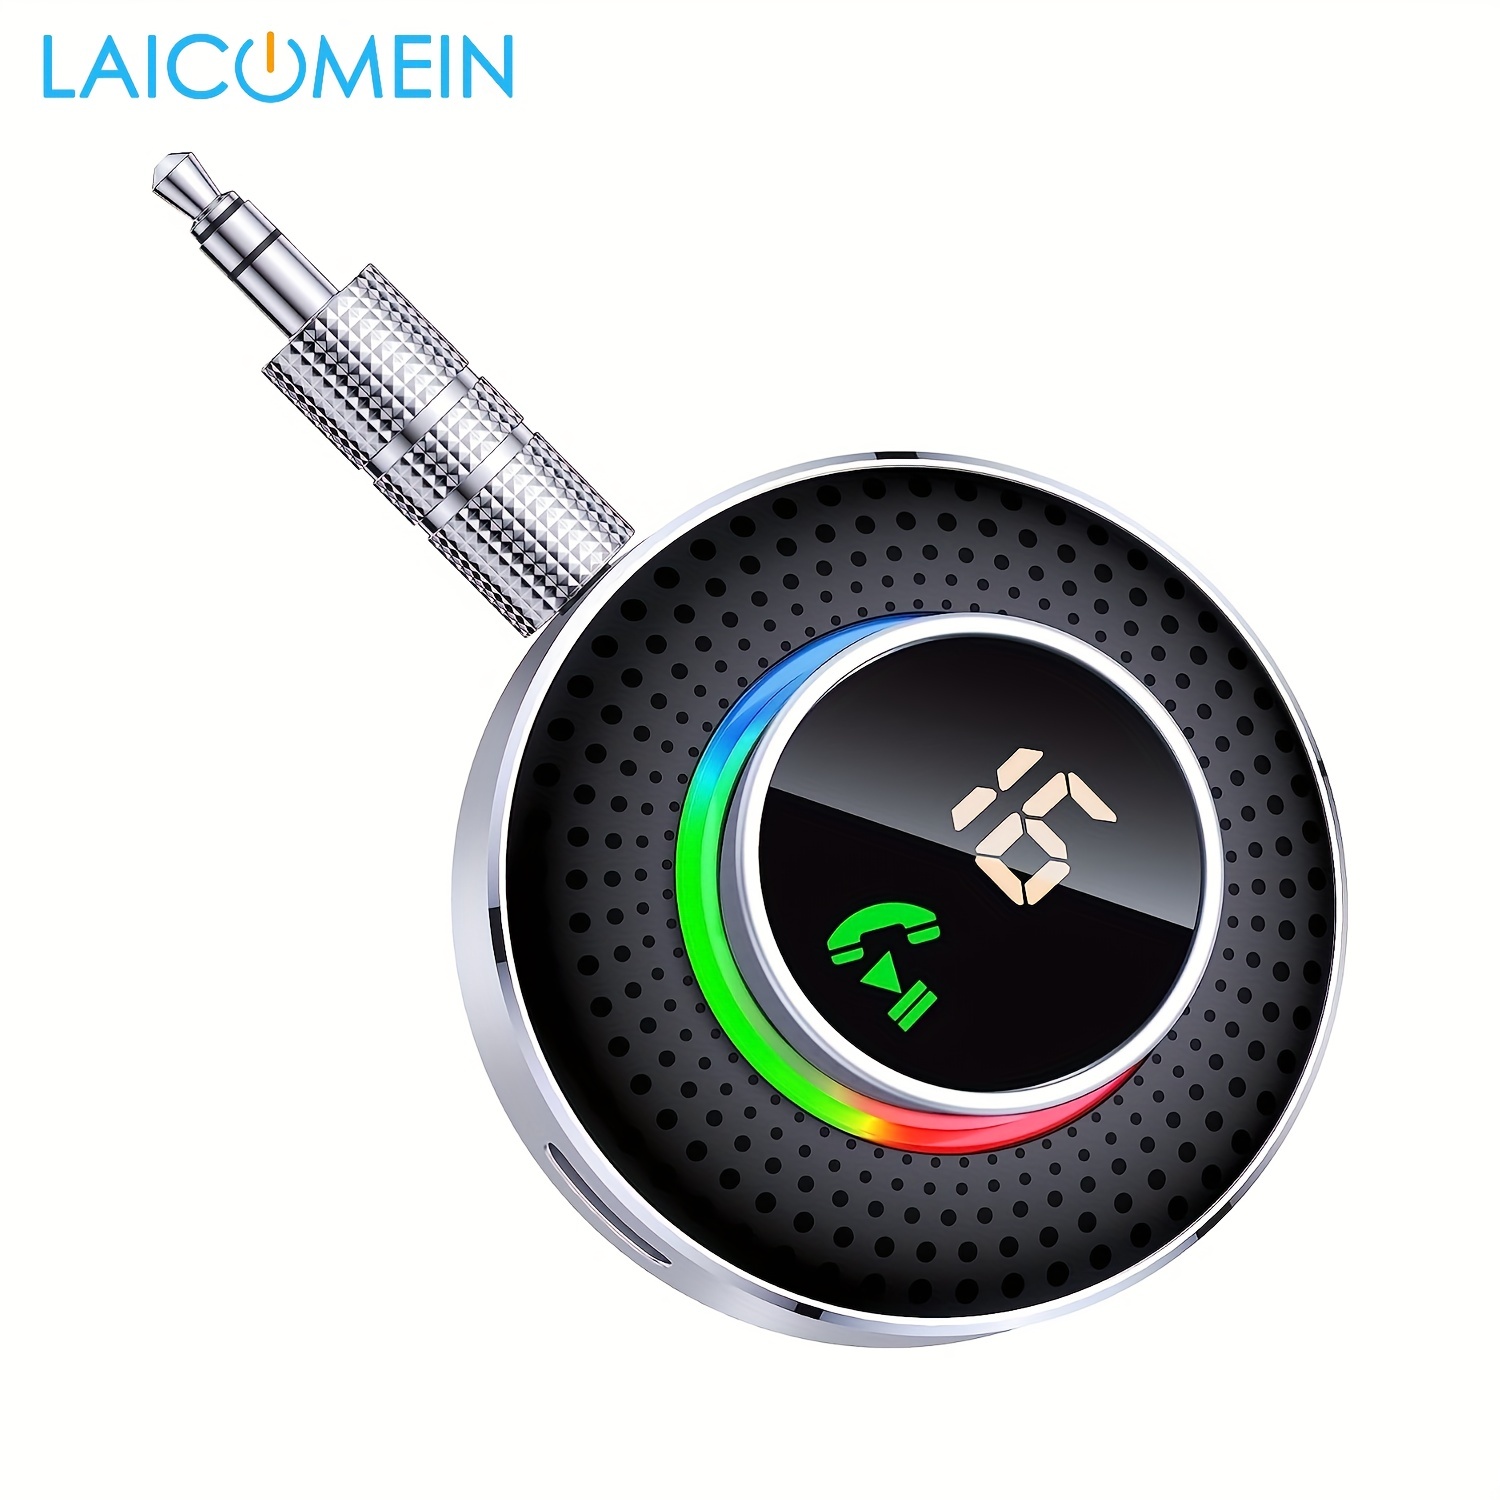 Aux Bluetooth Adapter for Car - Bluetooth 5.0 Receiver with Big Rotating  Knob, Portable Long 3.5mm/AUX Cable Bluetooth Auido Adapter for Car/Home